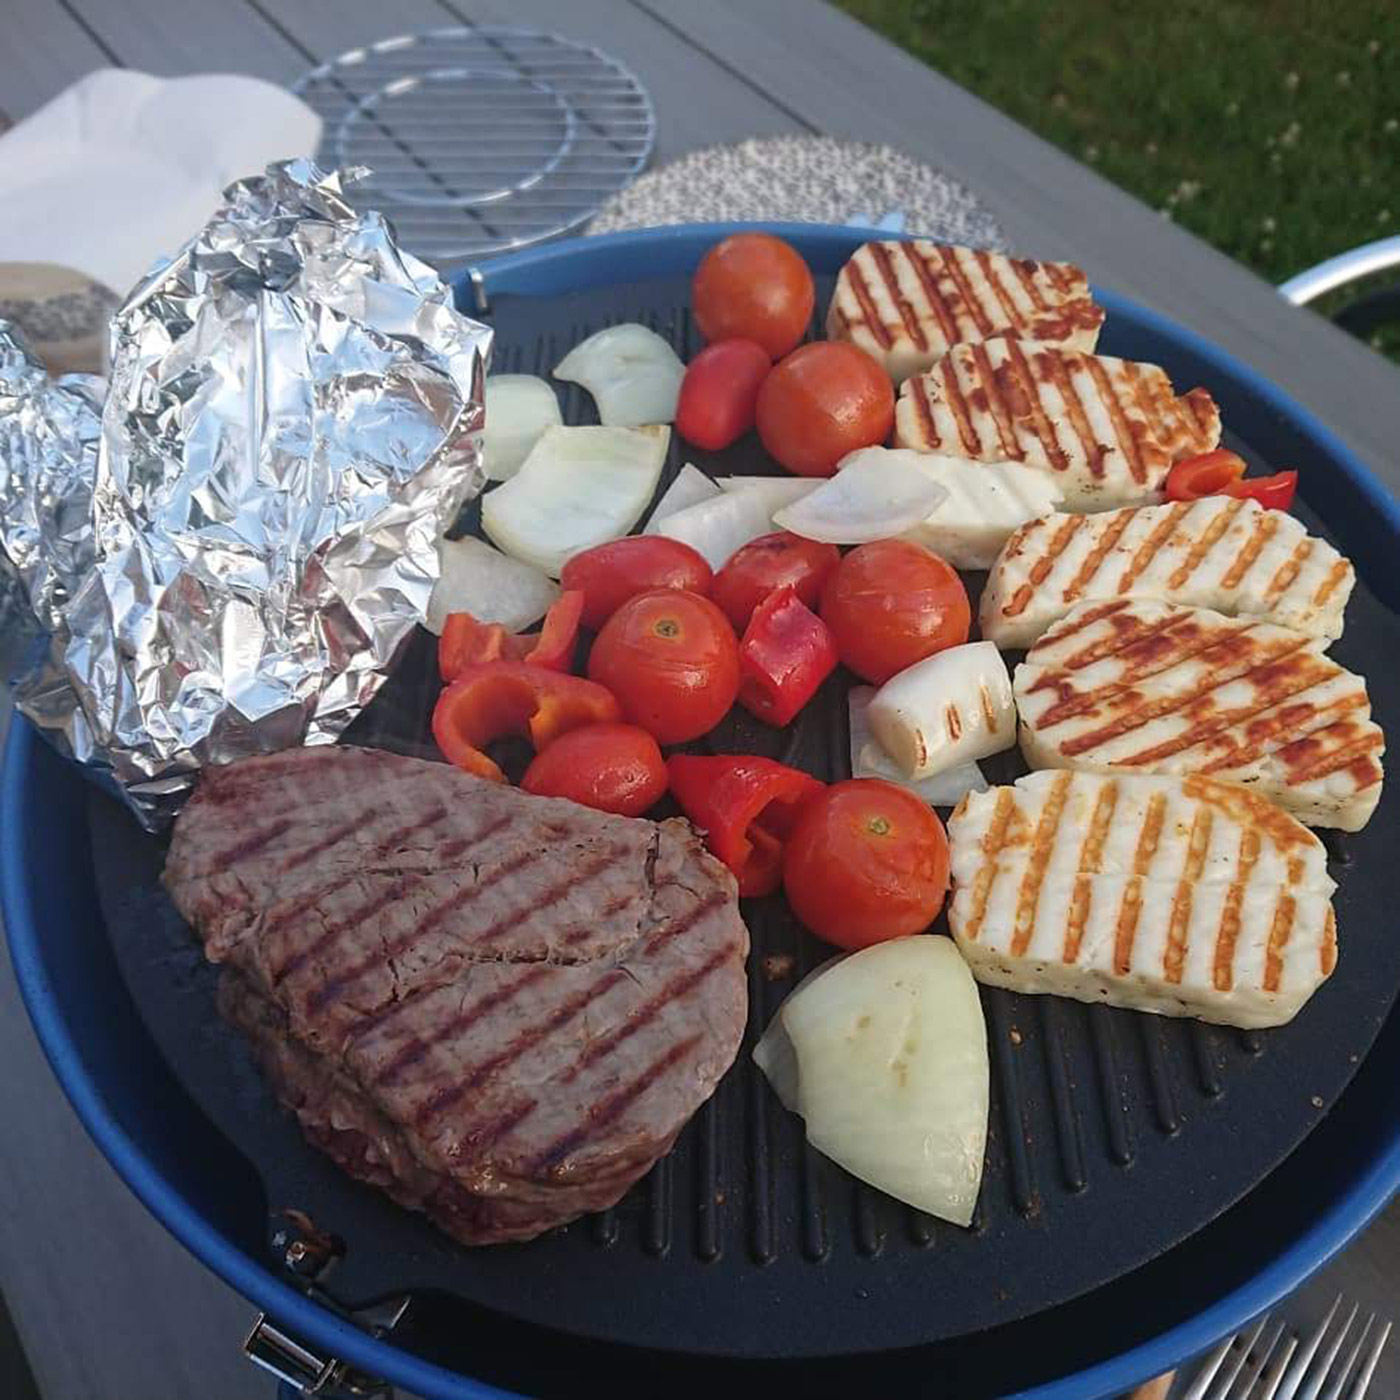 CAMPING GEAR | Putting Campingaz Party Grill To The Test